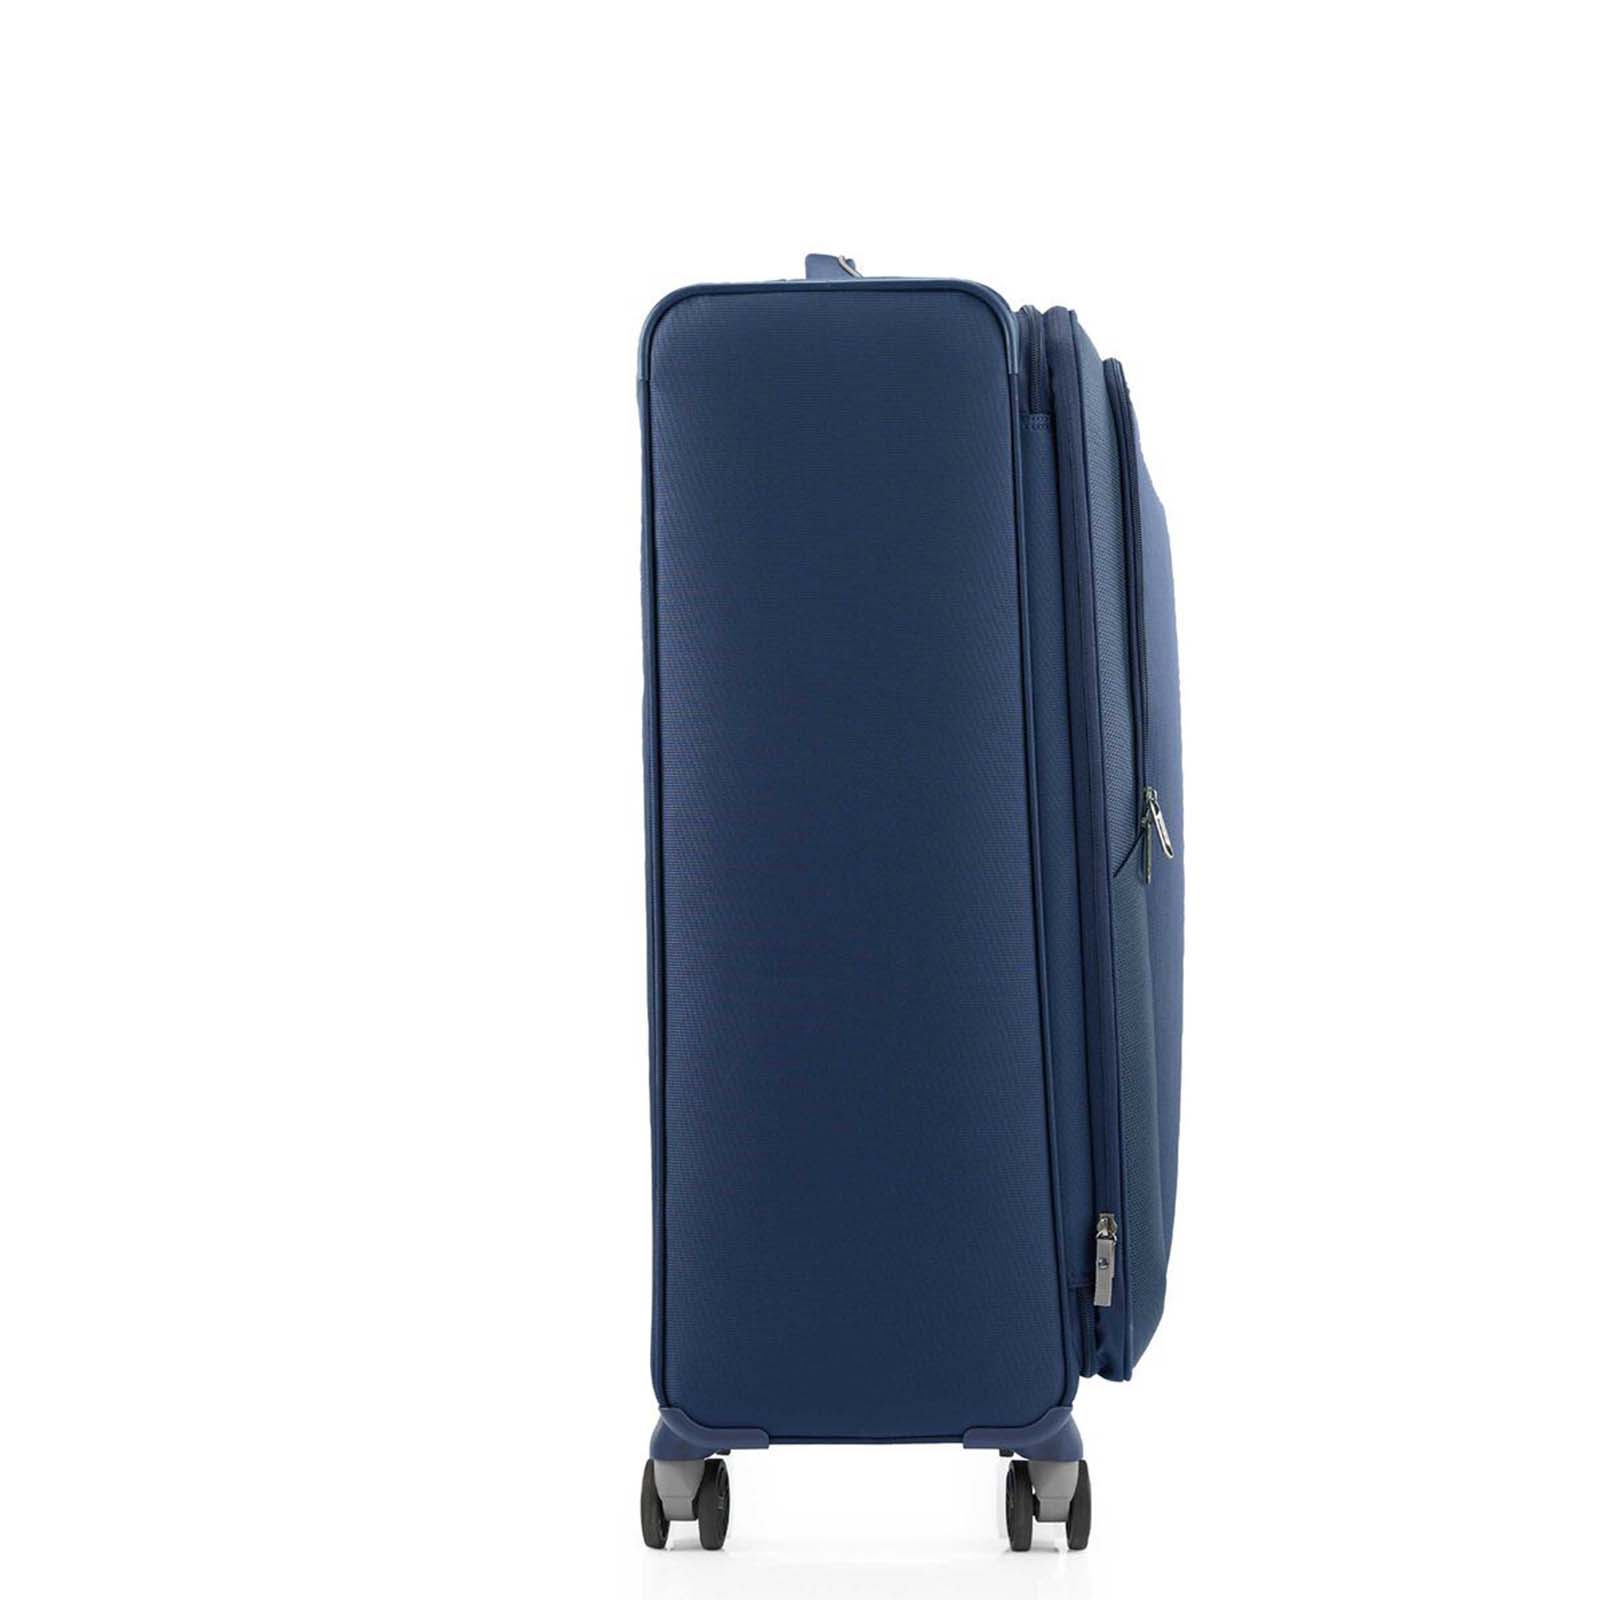 American-Tourister-Applite-4-Eco-82cm-Suitcase-Navy-Side